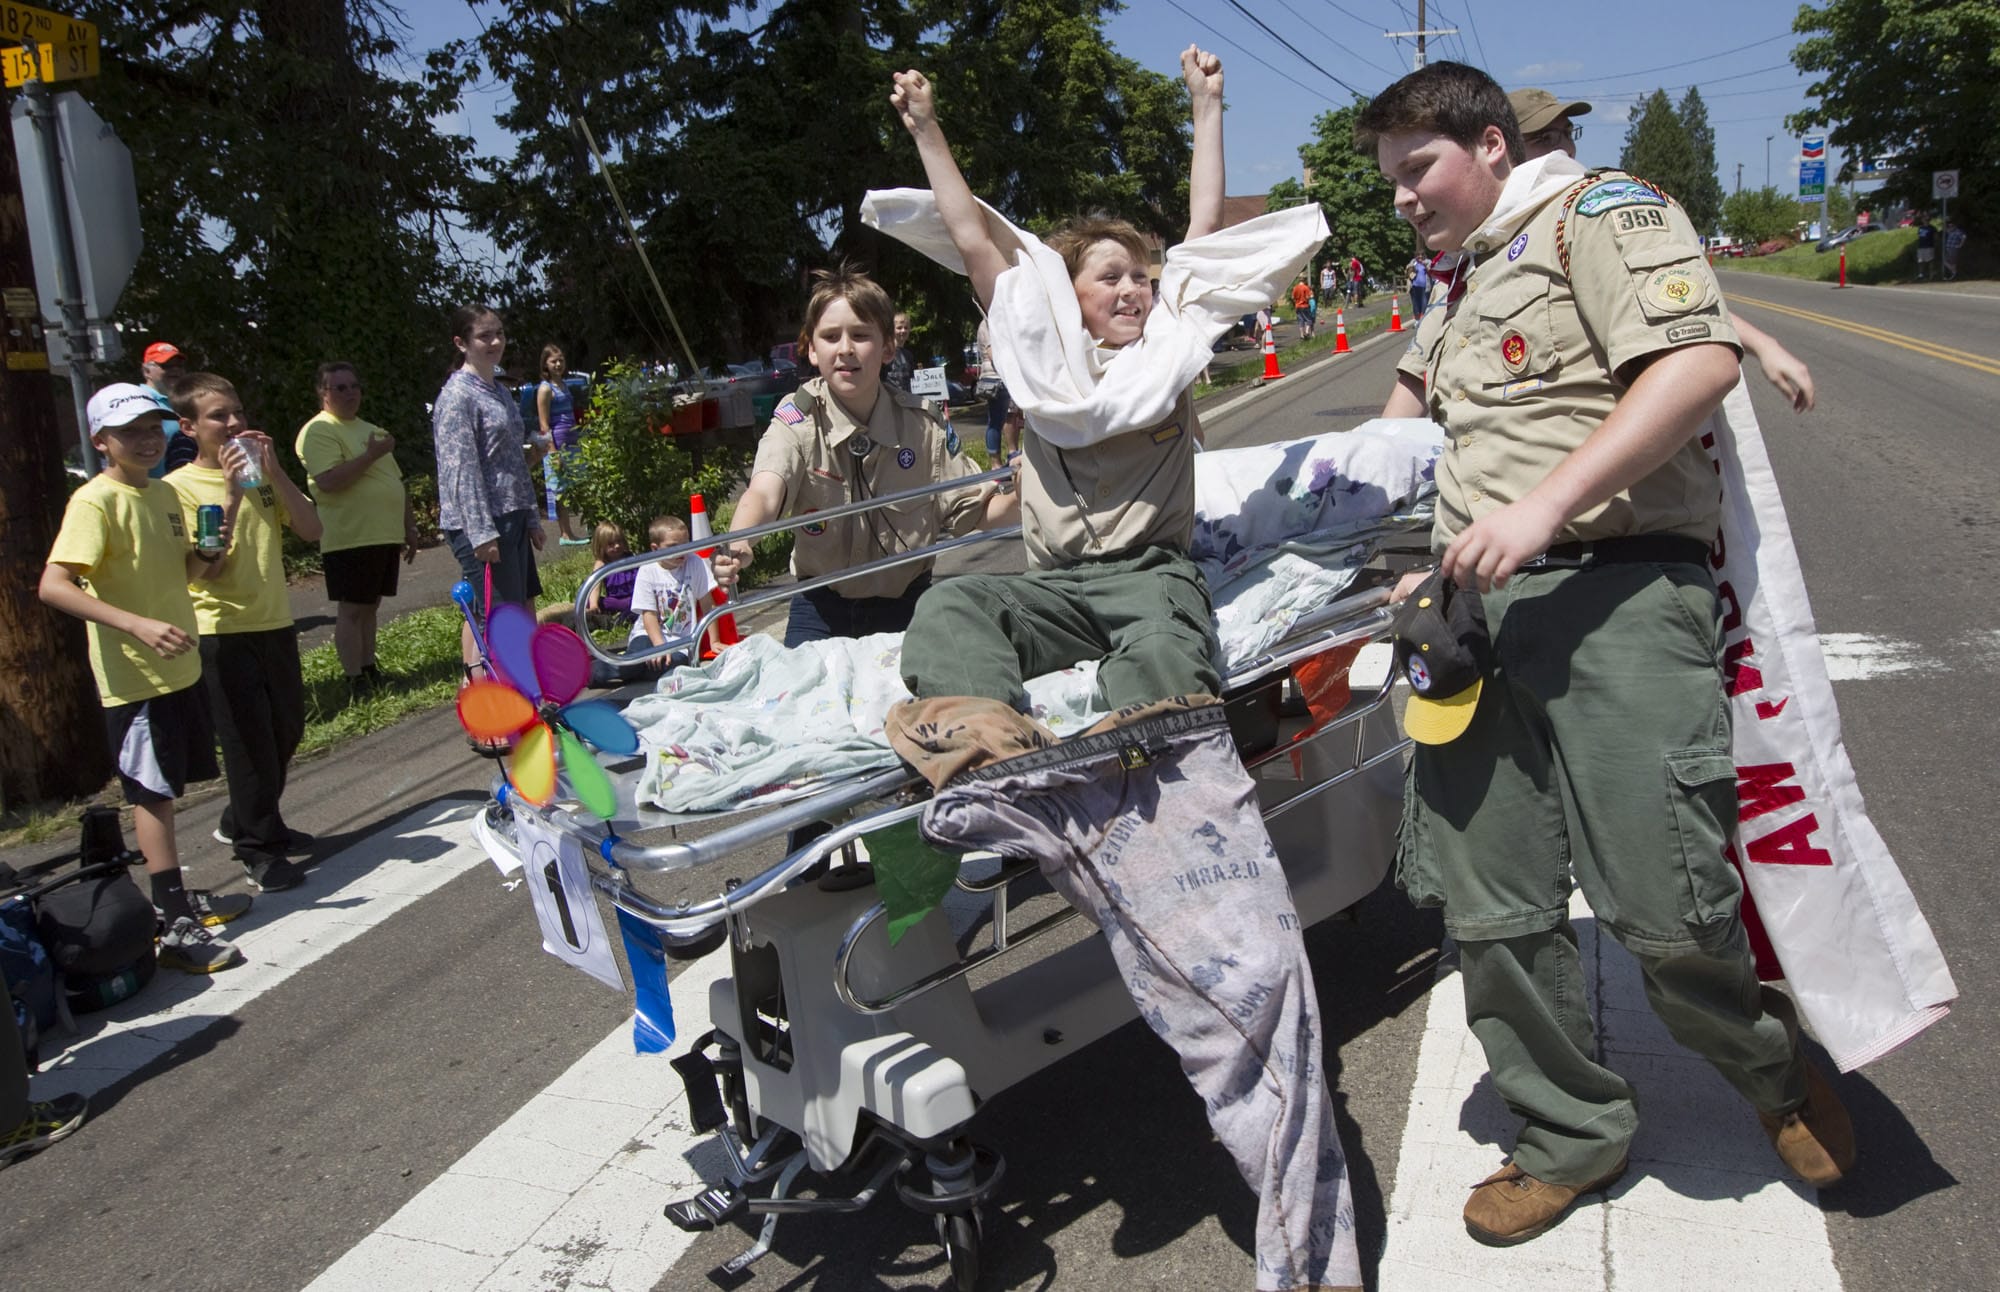 Jackson Sinclair, center, of Boy Scout Troop 359 celebrates as his team crosses the finish line during Saturday's bed races at Hockinson Fun Days.